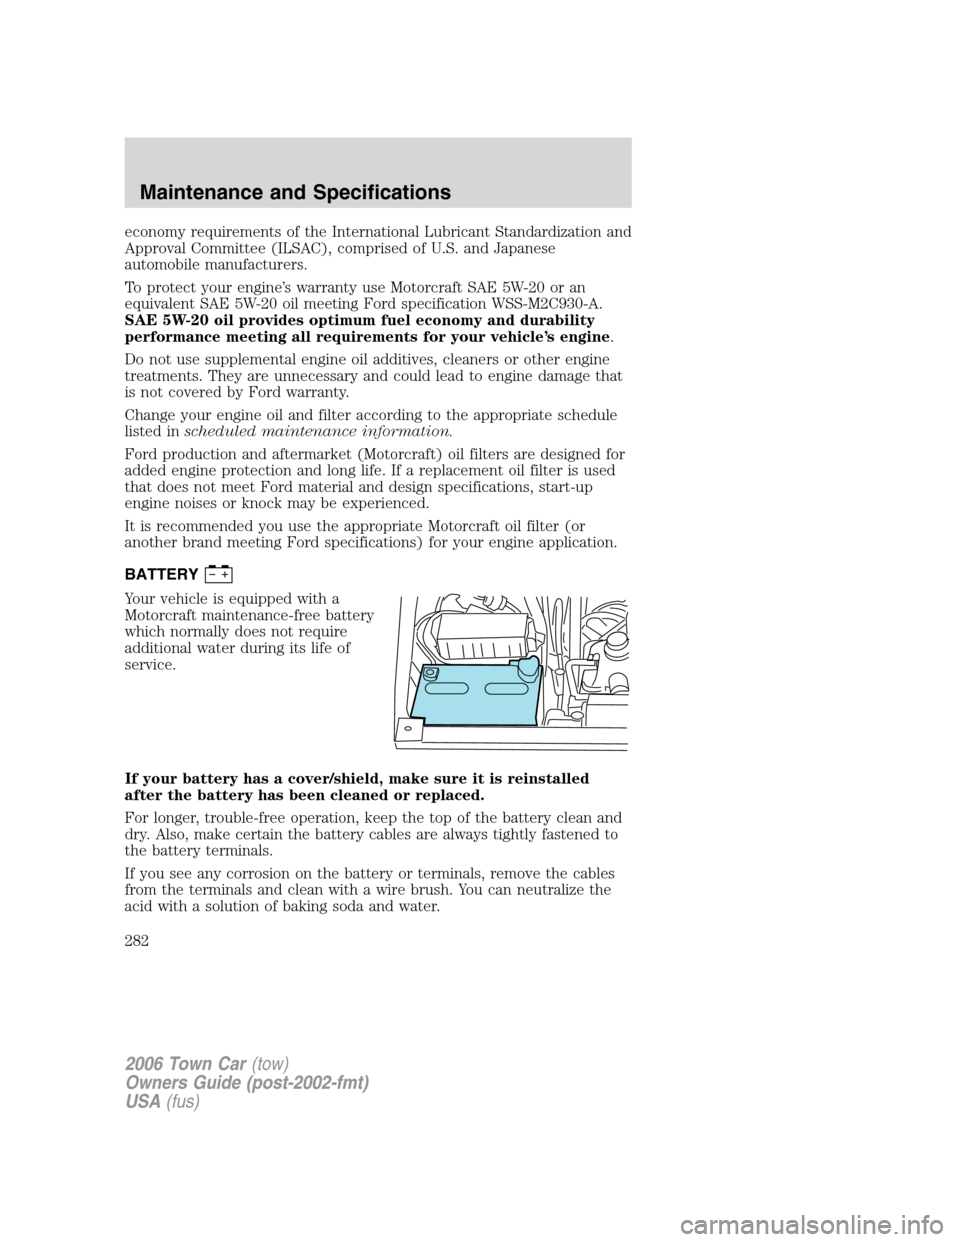 LINCOLN TOWN CAR 2006 User Guide economy requirements of the International Lubricant Standardization and
Approval Committee (ILSAC), comprised of U.S. and Japanese
automobile manufacturers.
To protect your engine’s warranty use Mot